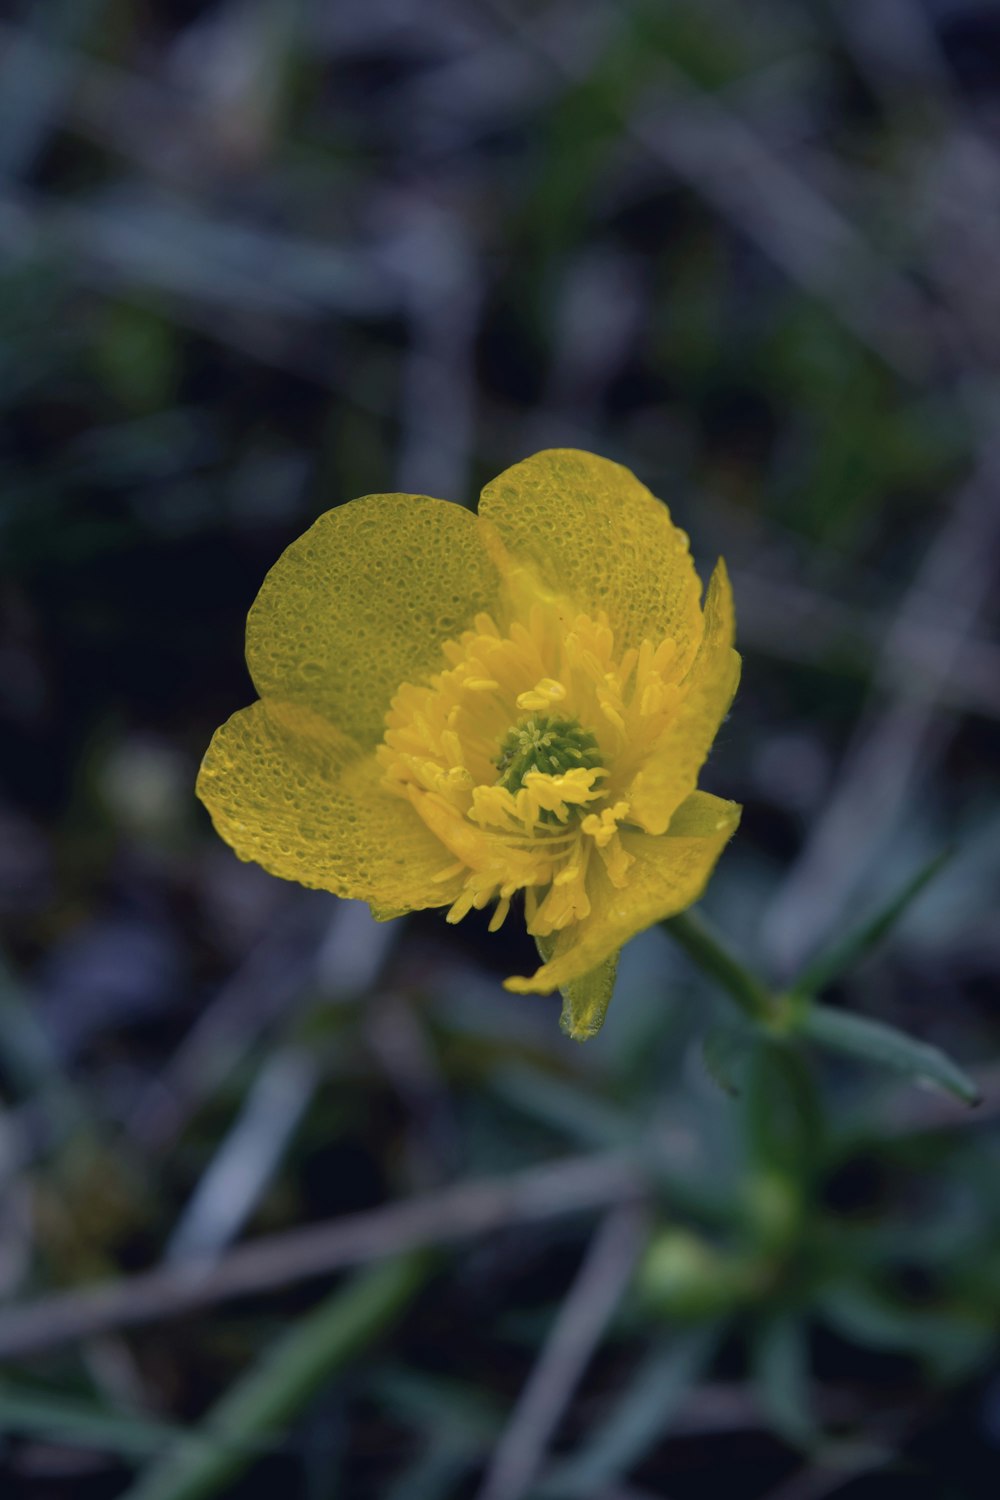 a small yellow flower with a green center